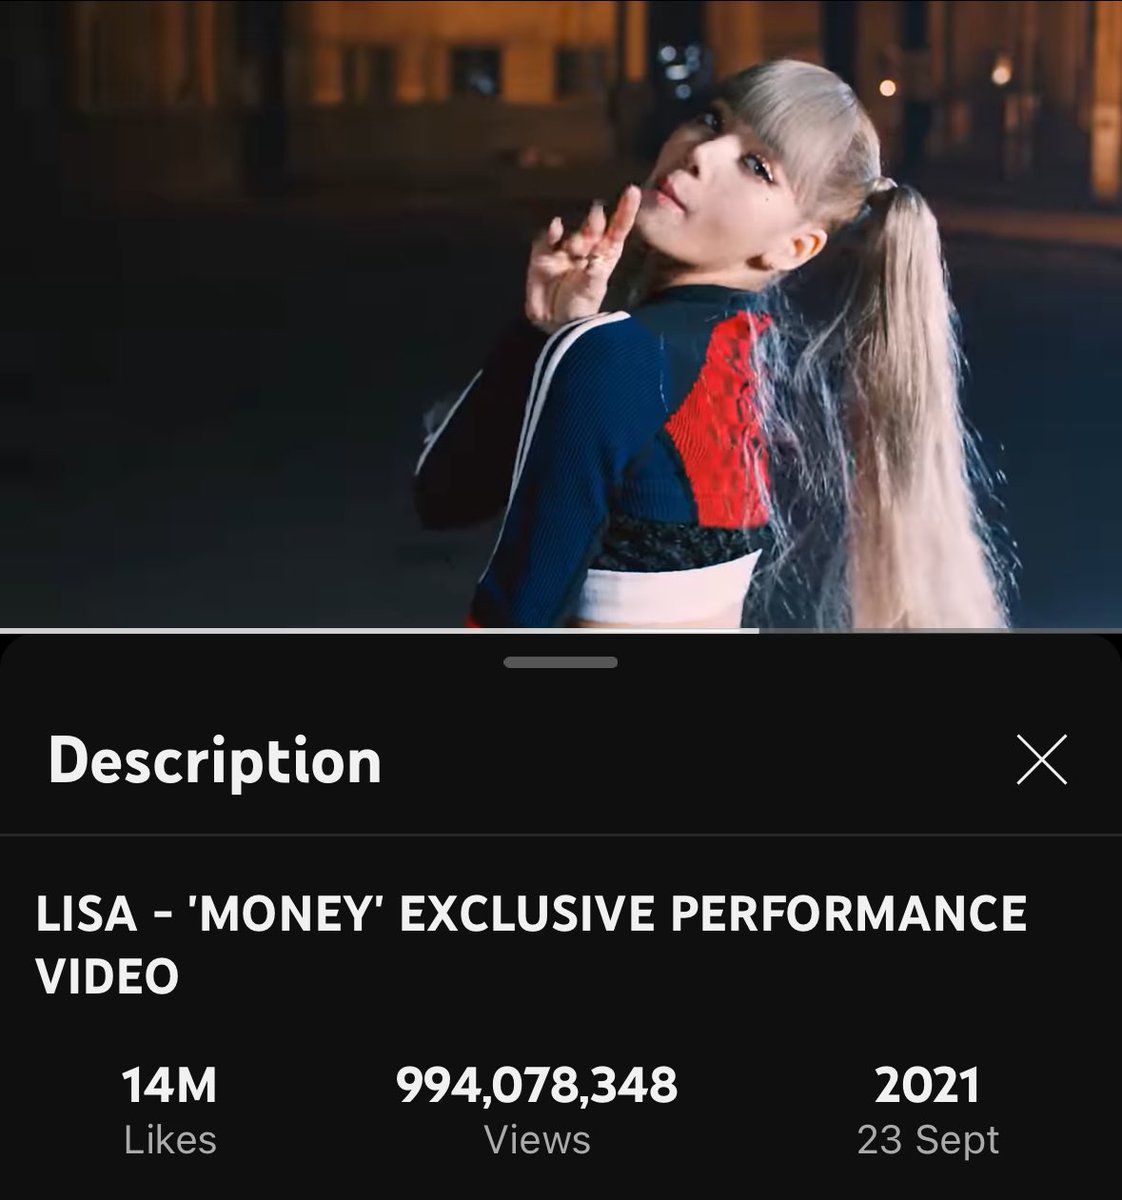 LALISA is less than 3M away from 700M views 🔥

MONEY is less than 6M away from 1BILLION views 🔥🔥 

KEEP STREAMING FOR LISA 📣📣📣

#LISA #LALISA #MONEY #LLOUD